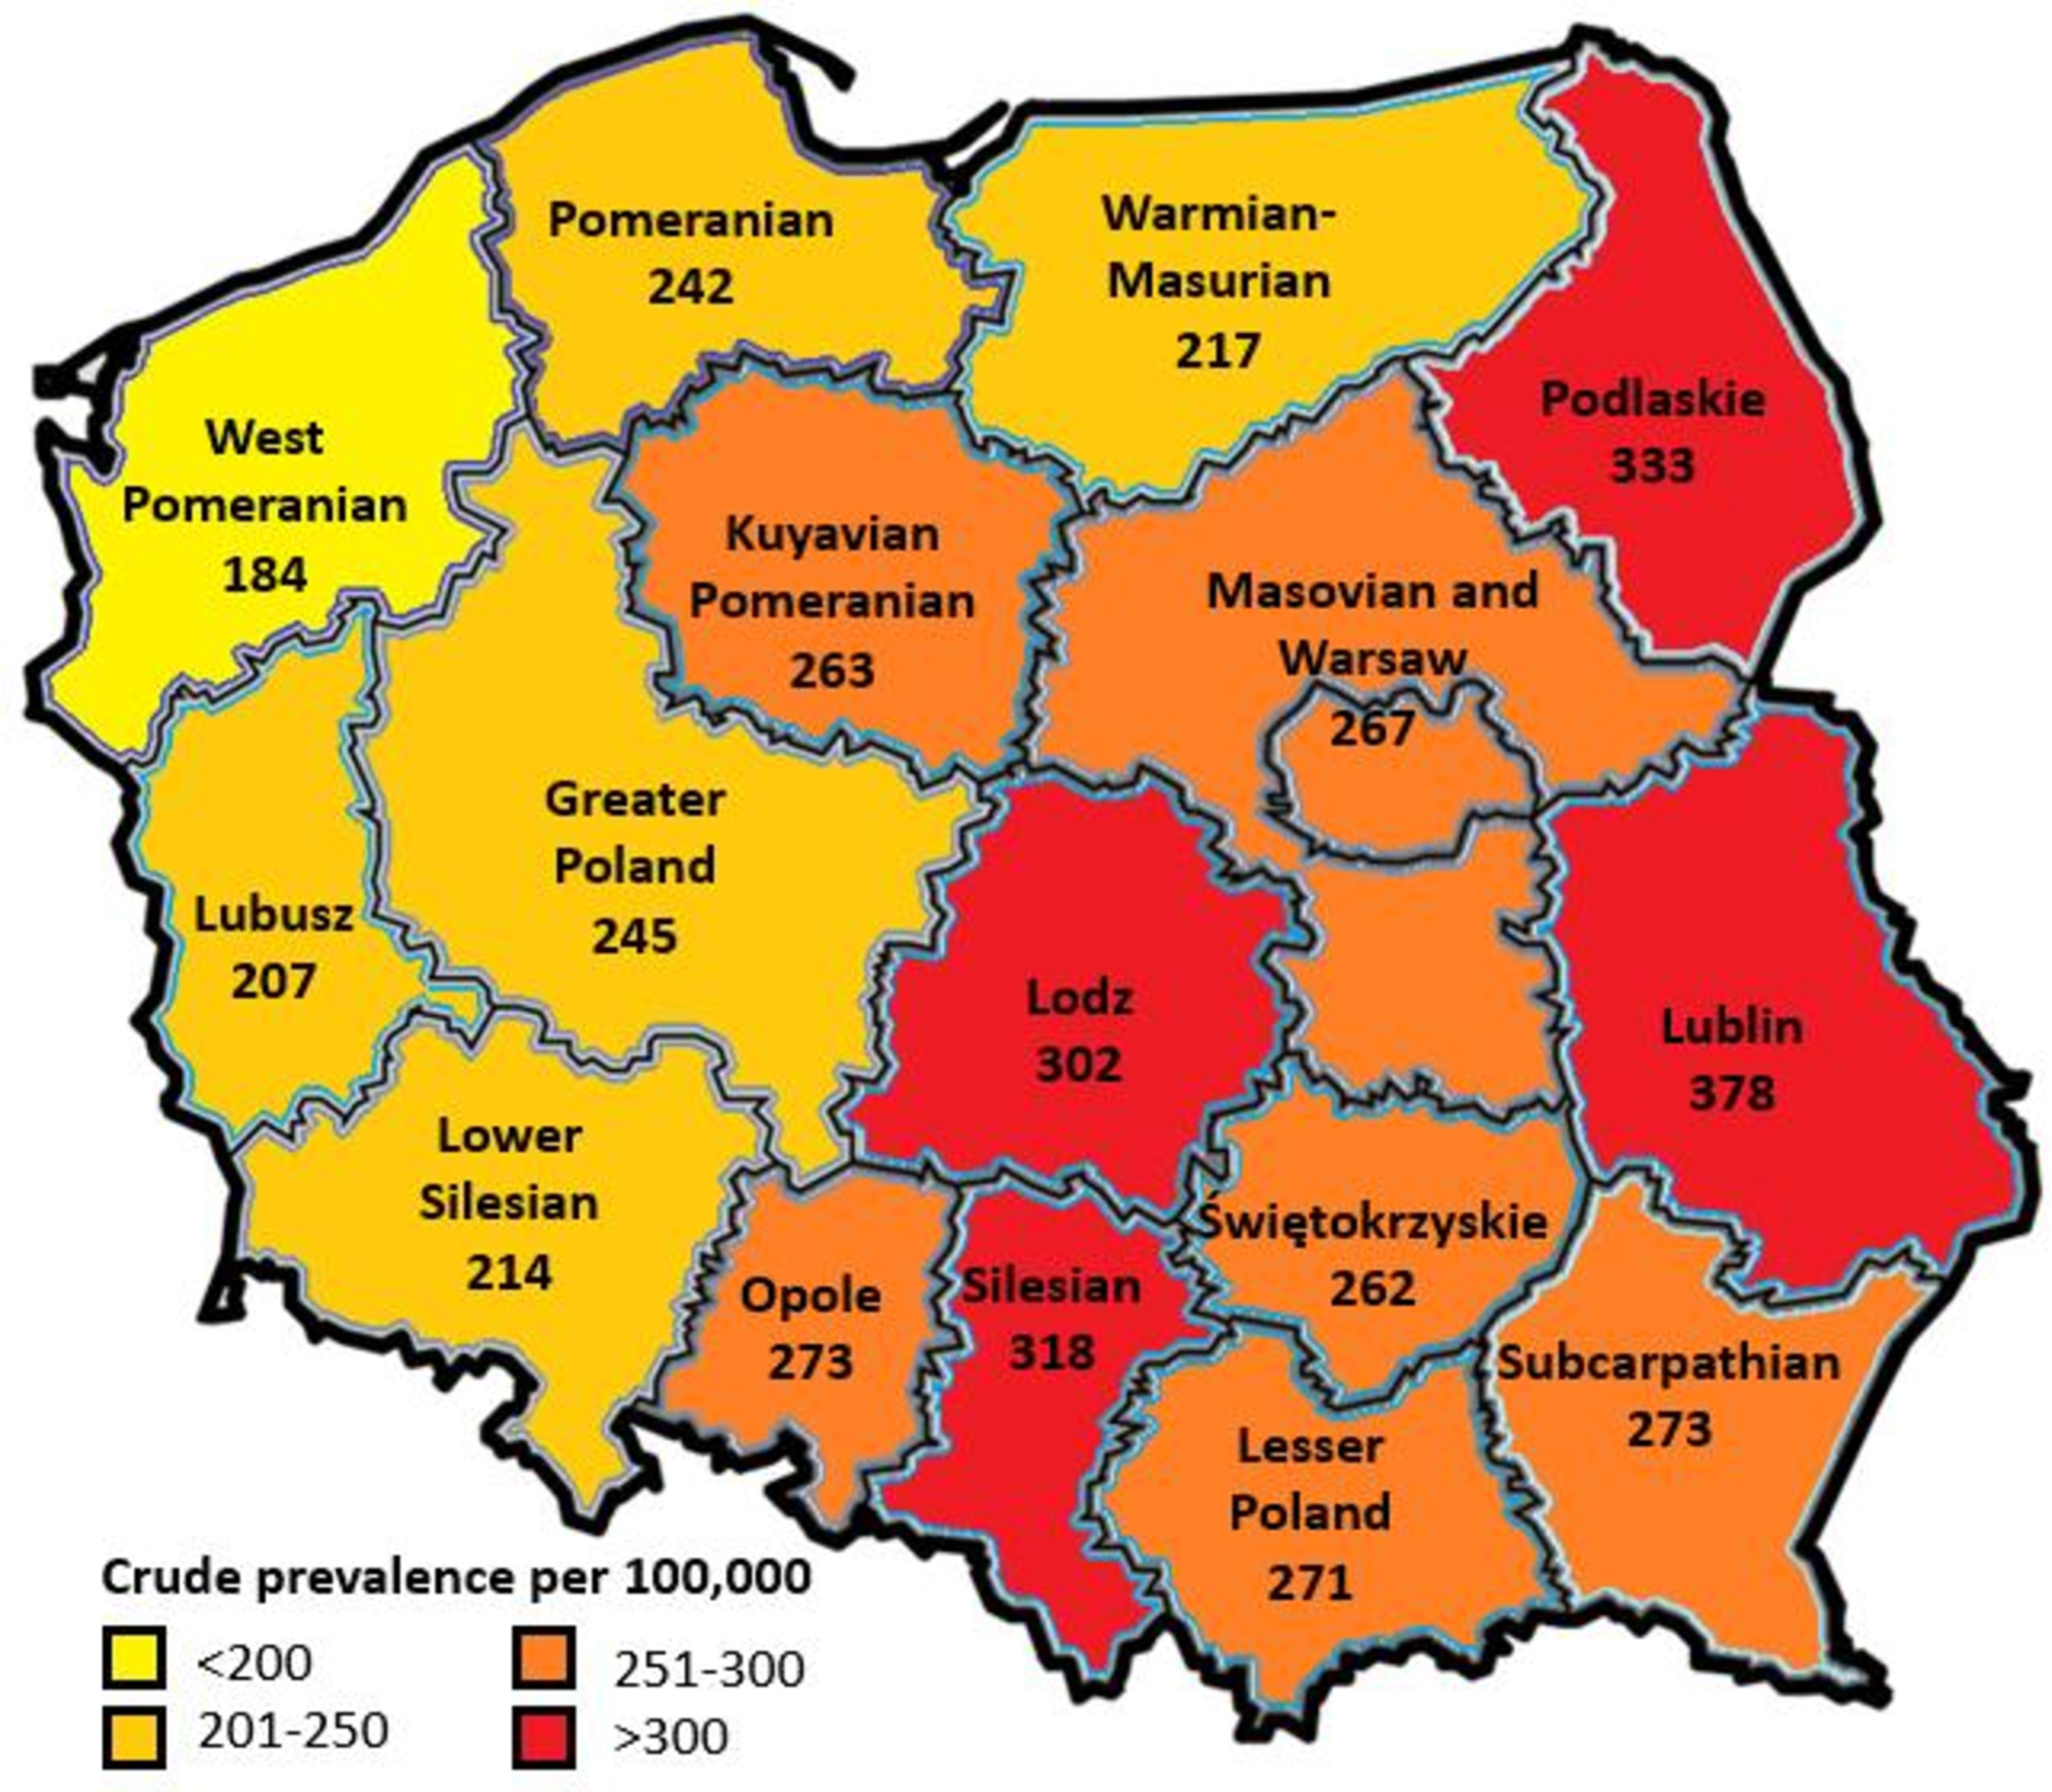 Regional distribution of Parkinson’s disease crude prevalence in Poland for the year 2019. Numbers represent prevalence per 100,000 inhabitants. The map used in this figure was created through MapChart (https://www.mapchart.net).